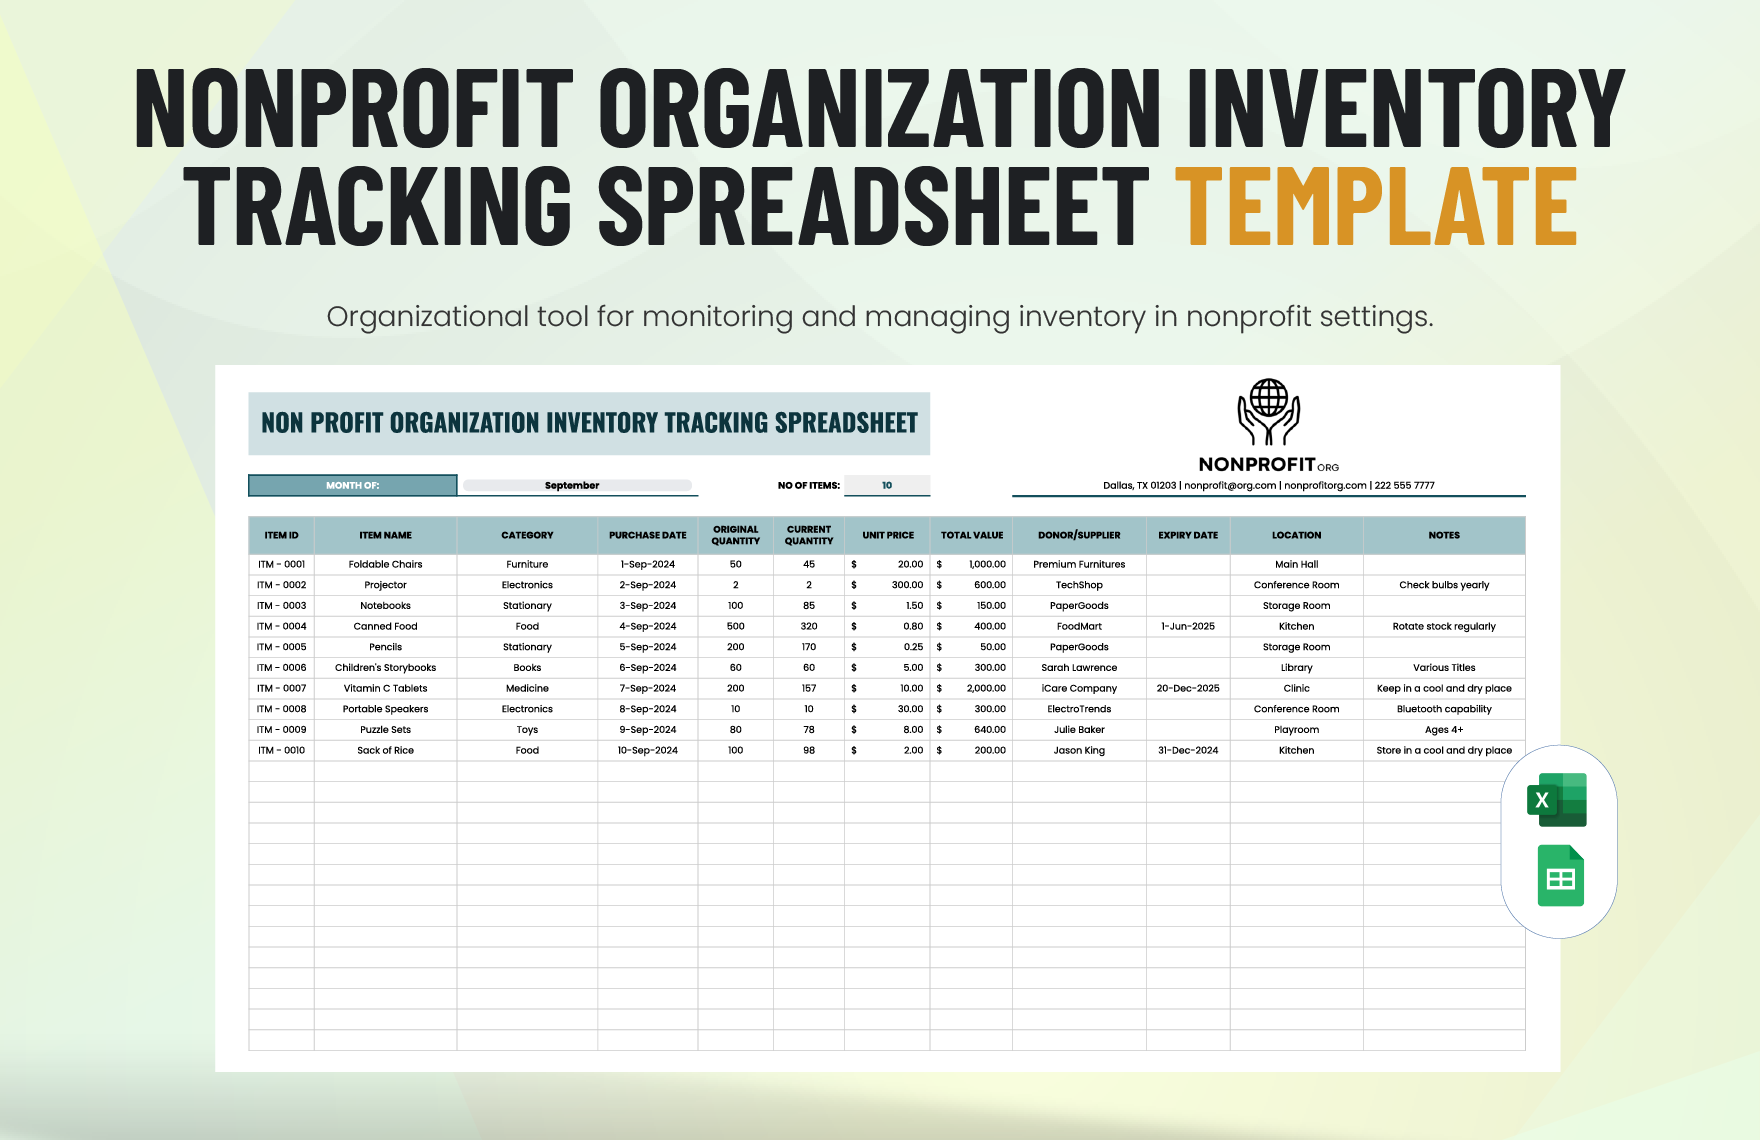 Nonprofit Organization Inventory Tracking Spreadsheet Template in Excel, Google Sheets